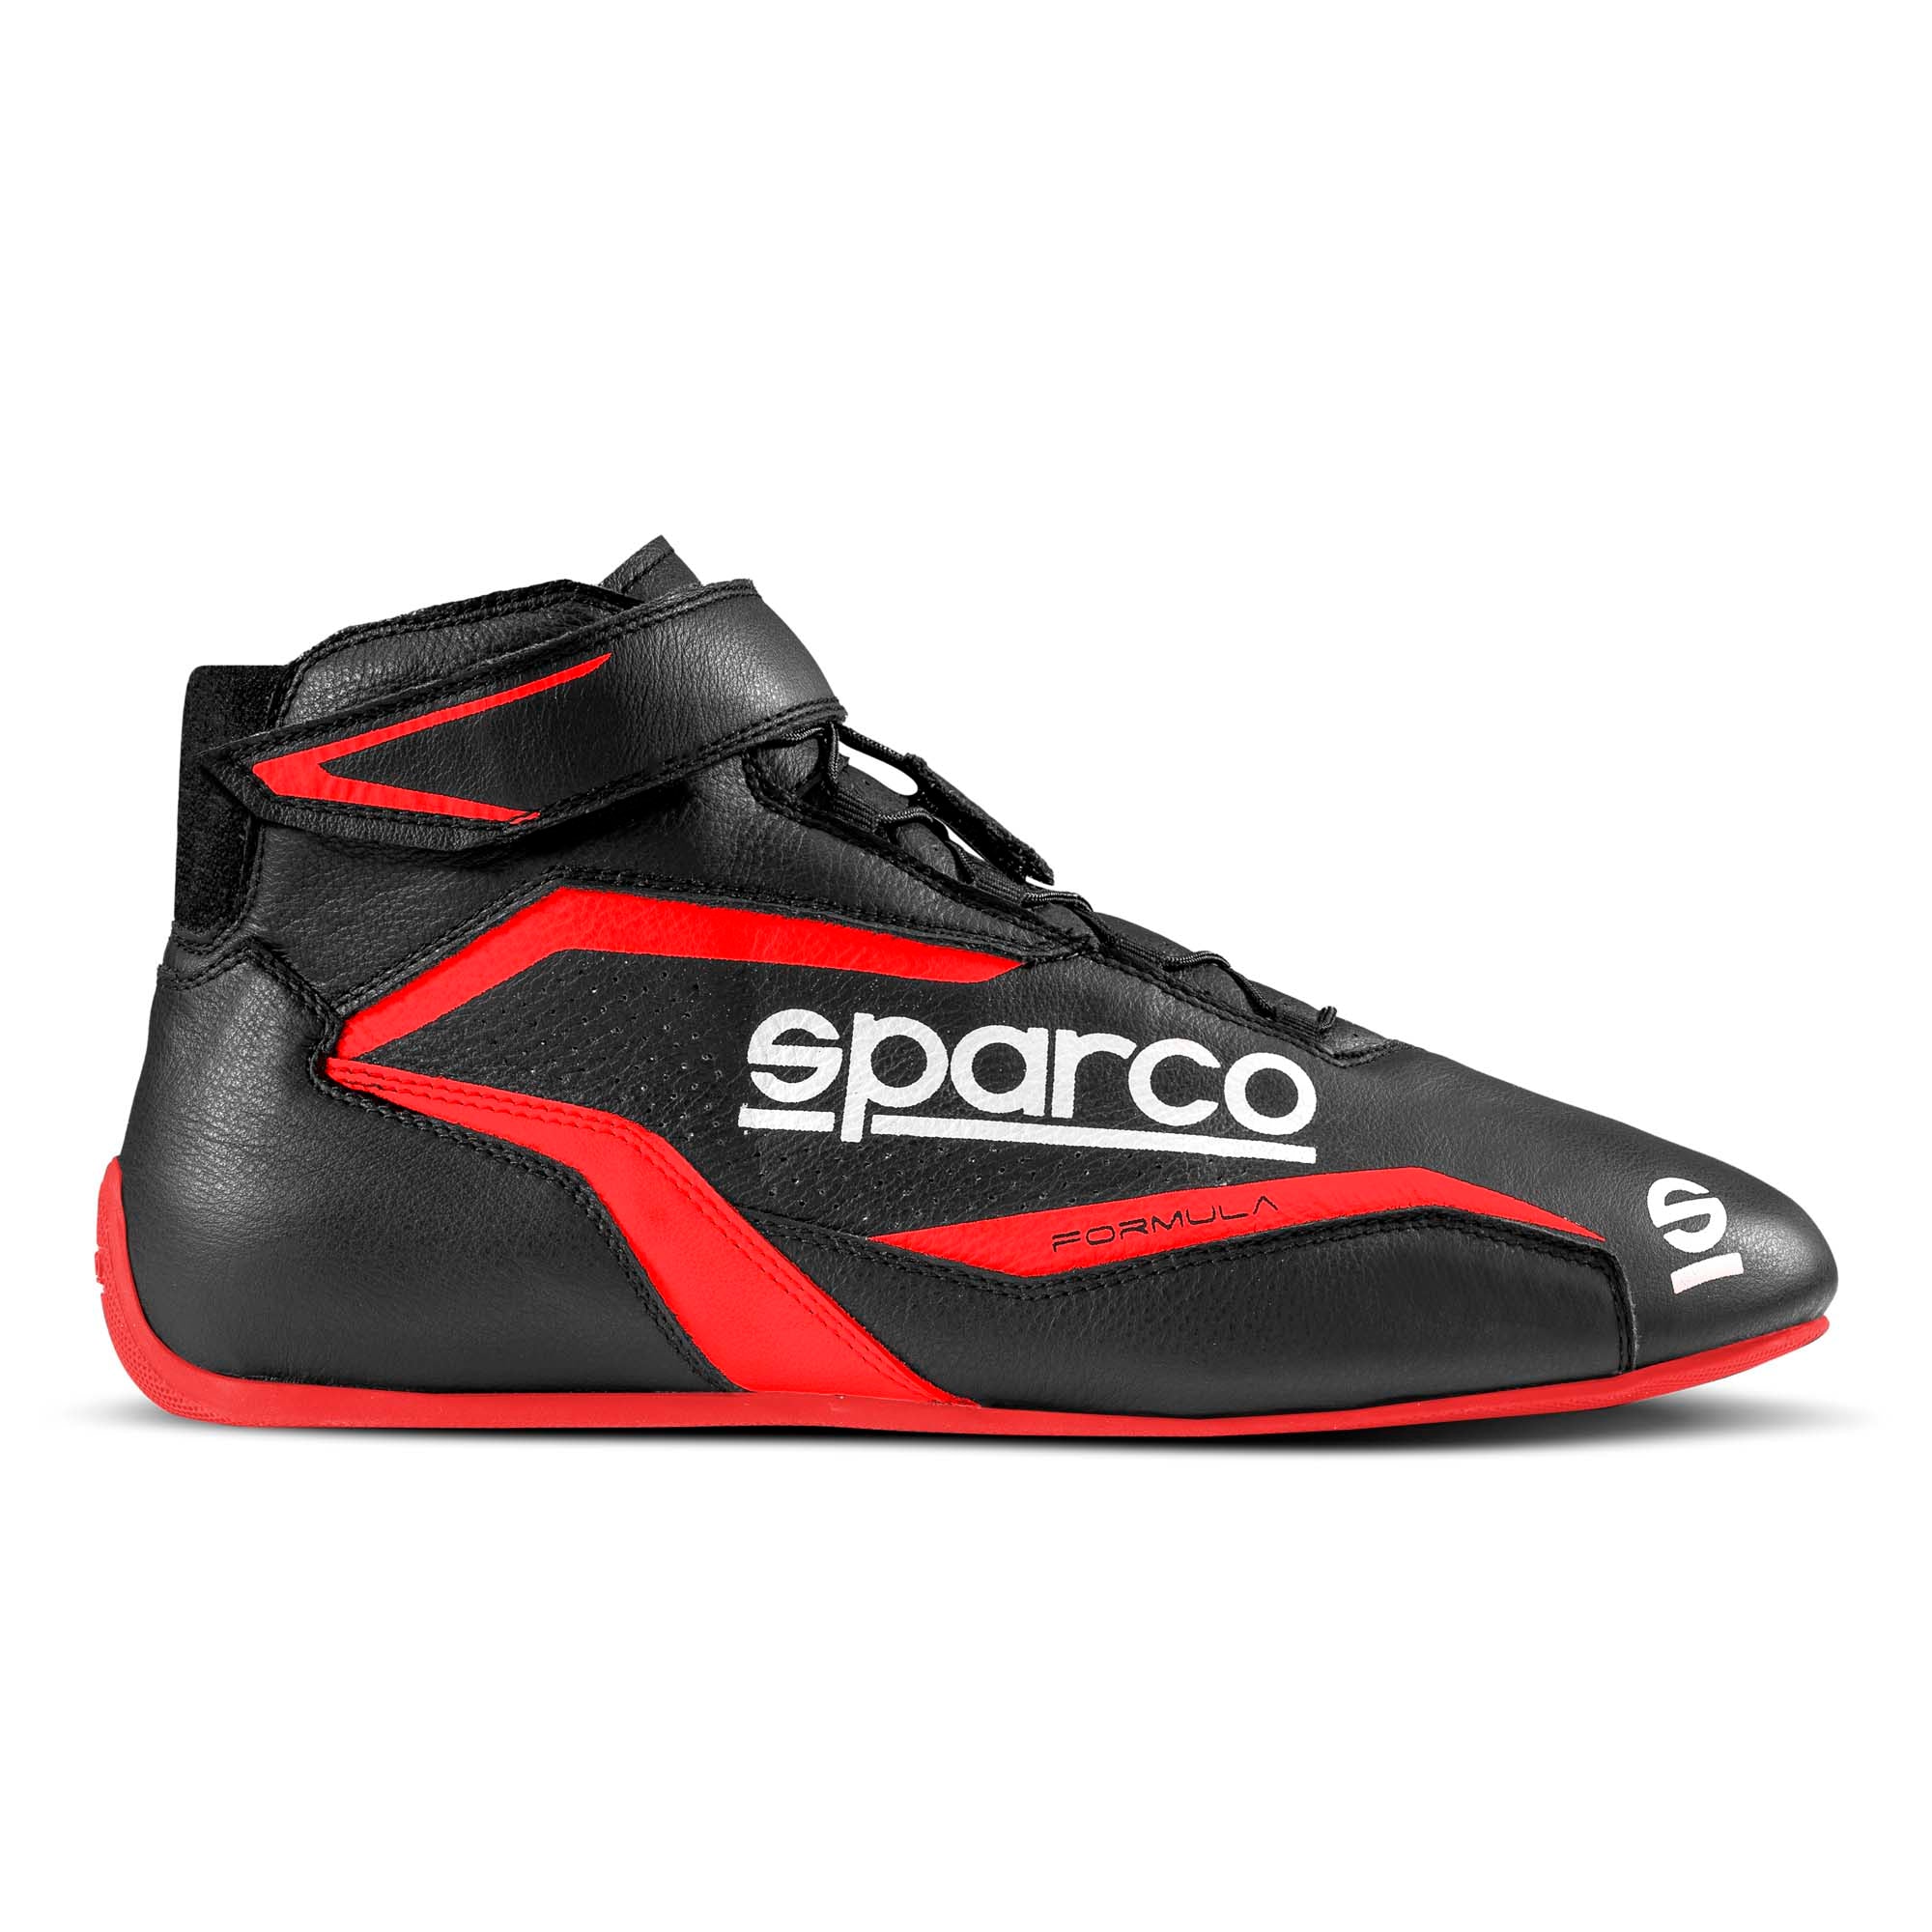 Sparco Formula Racing Shoes - Black/Red